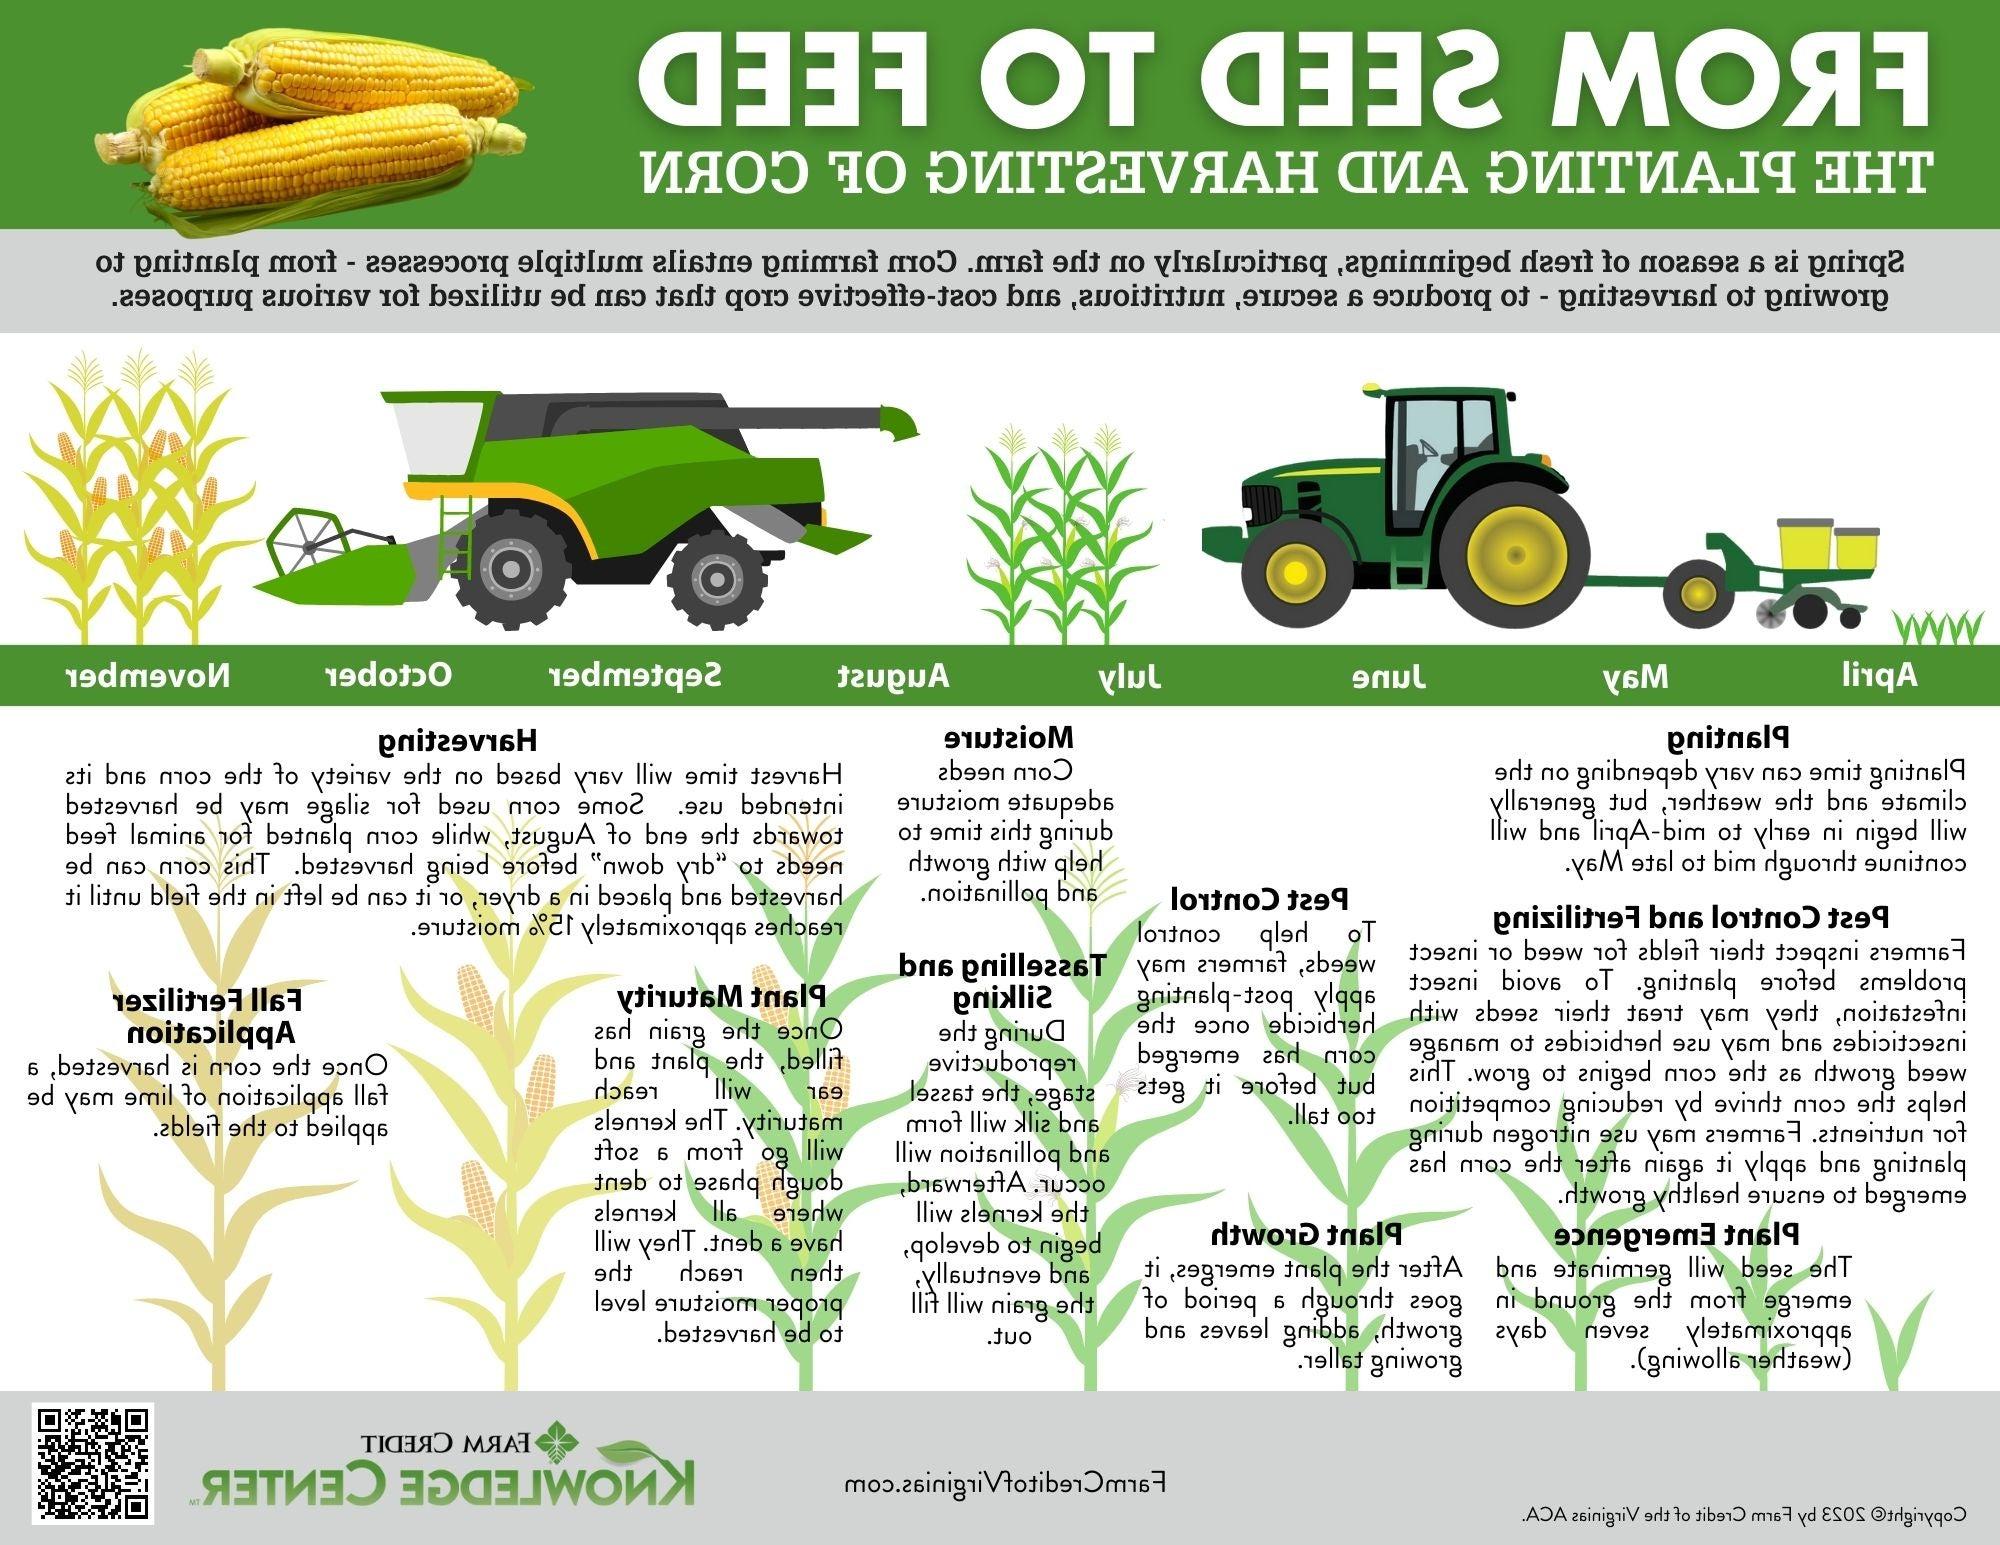 from seed to feed harvesting corn infographic